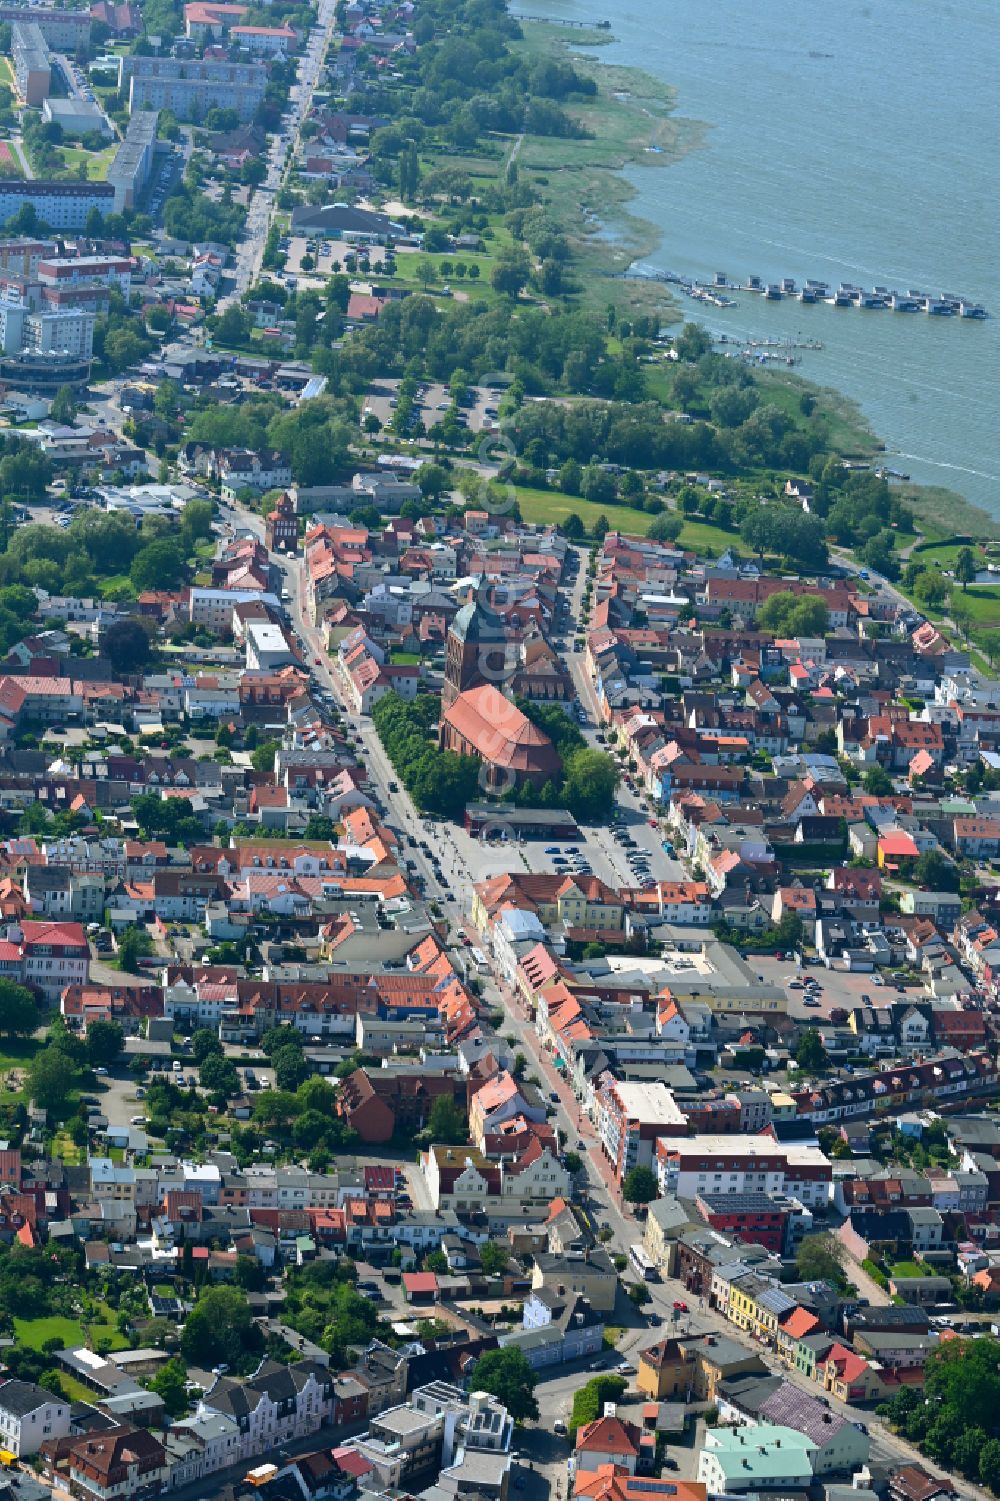 Ribnitz from the bird's eye view: Old Town area and city center in Ribnitz at the baltic sea coast in the state Mecklenburg - Western Pomerania, Germany